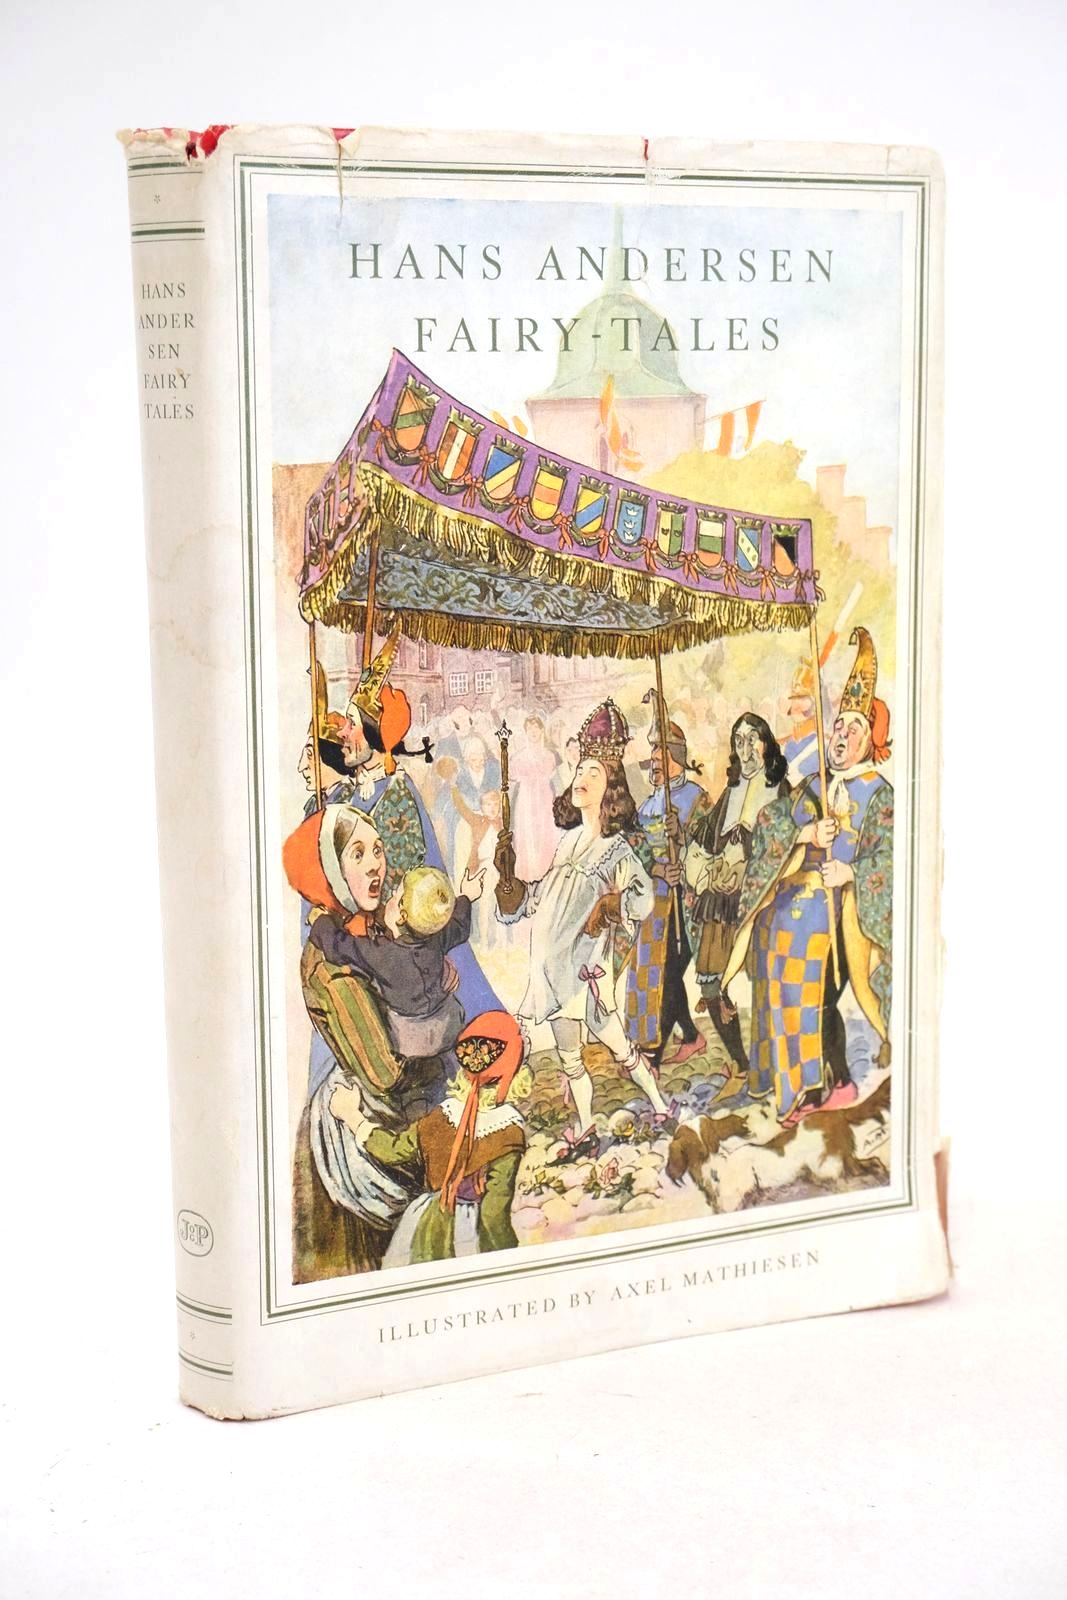 Photo of HANS ANDERSEN FAIRY-TALES written by Andersen, Hans Christian illustrated by Mathiesen, Axel published by Jespersen &amp; Pio Publishers (STOCK CODE: 1325905)  for sale by Stella & Rose's Books